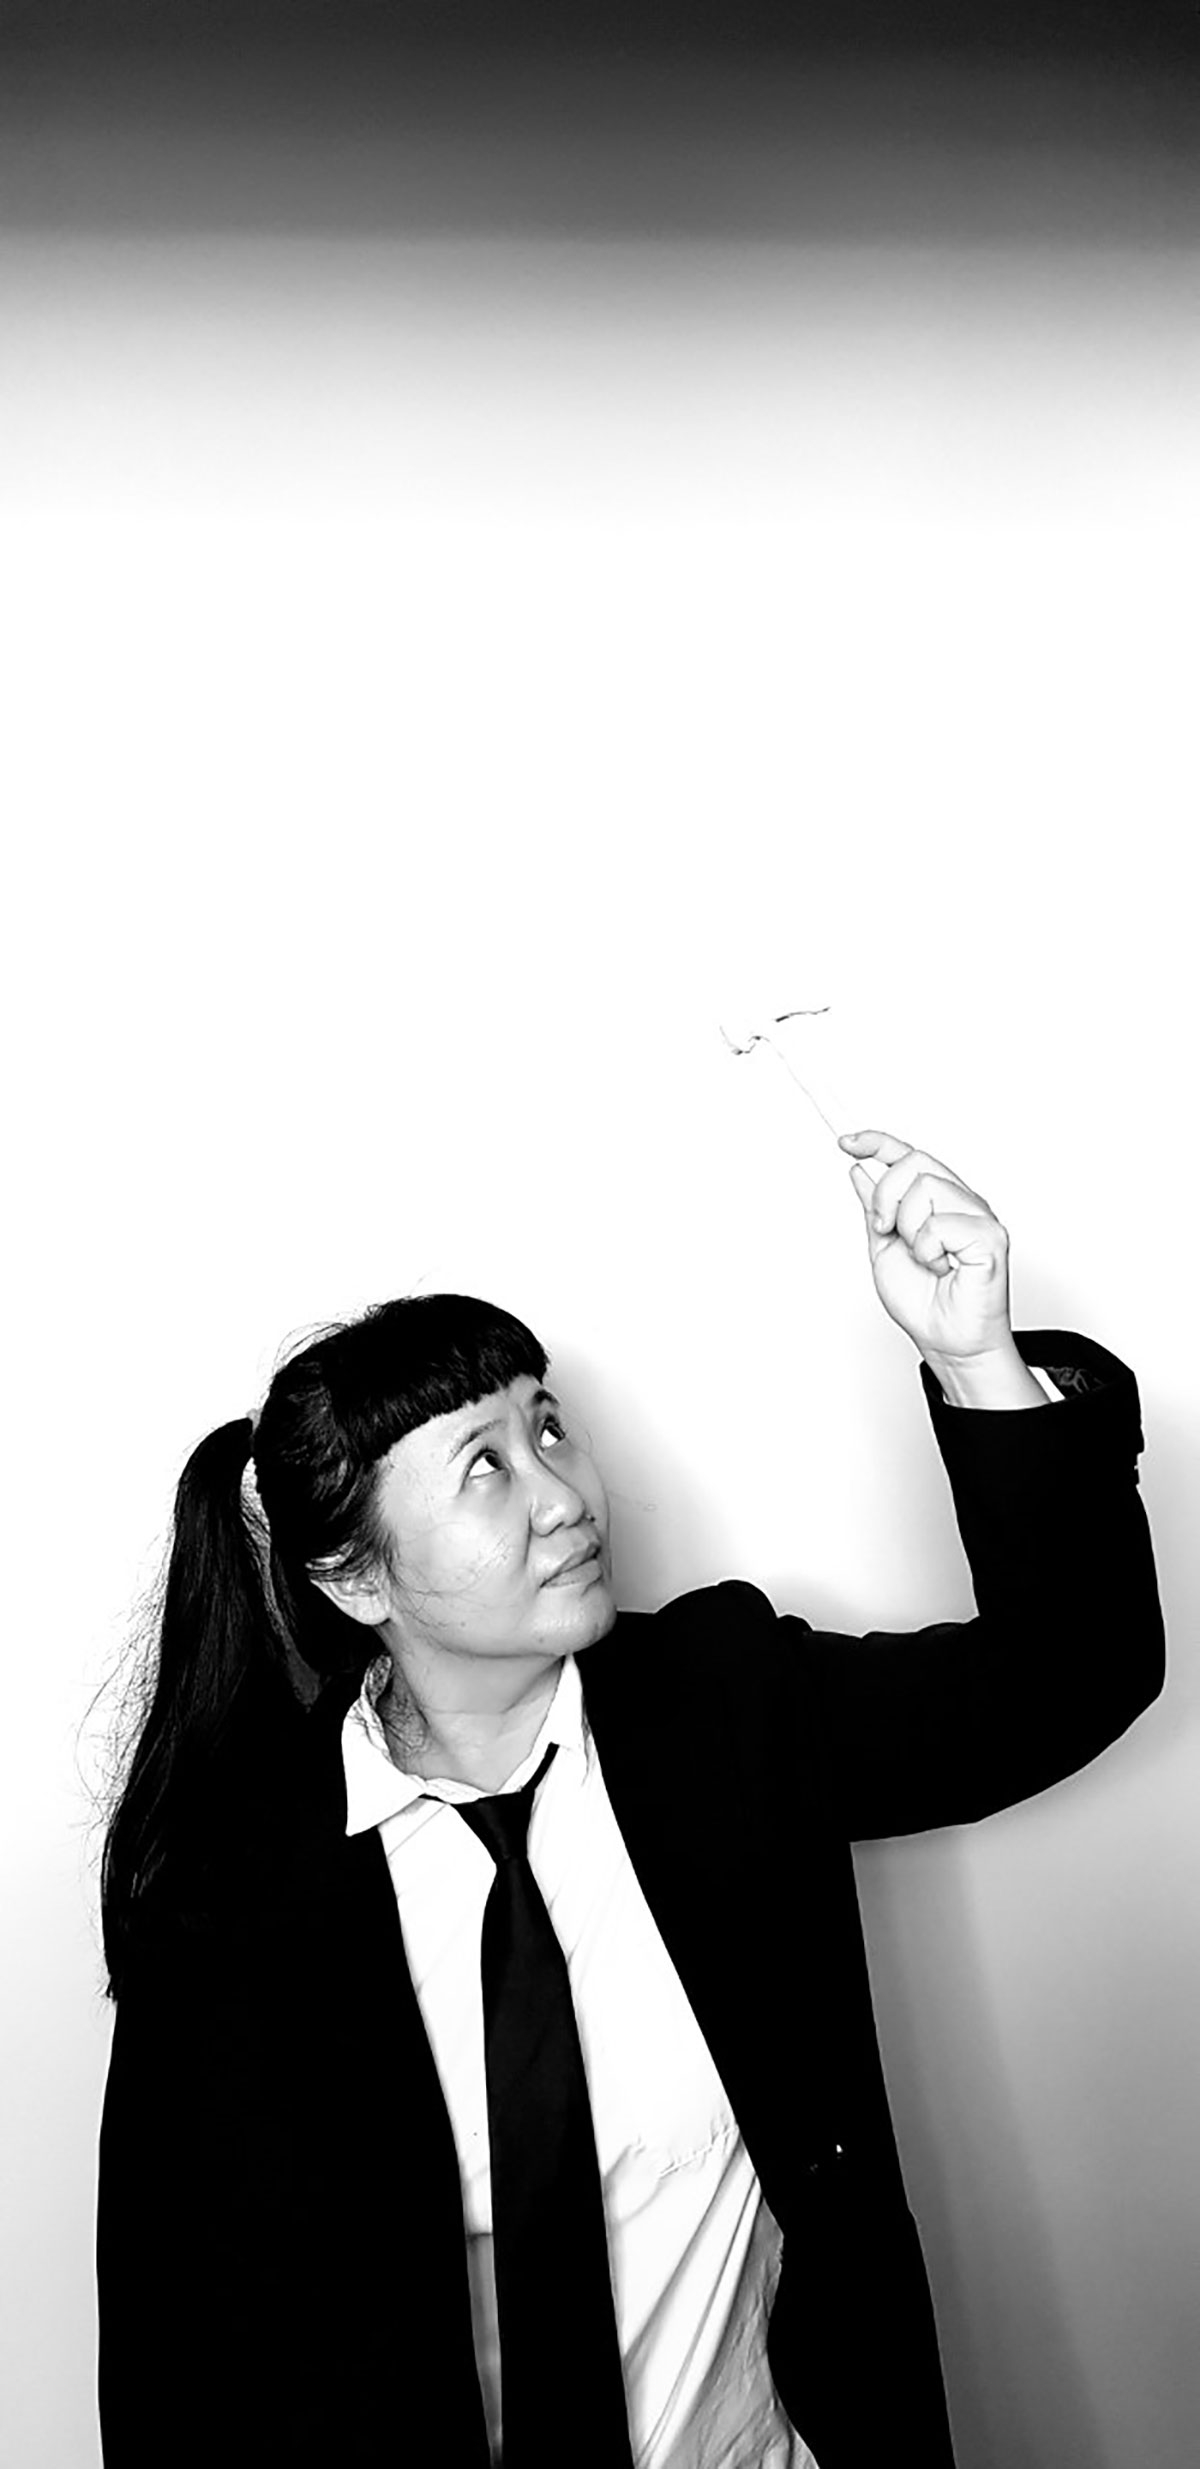 A black-and-white portrait of anGie seah, who is dressed in a black blazer, white collared shirt, and black tie. Her long hair is in pigtails. She gazes upwards towards her raised hand, which is holding a miniature hammer.